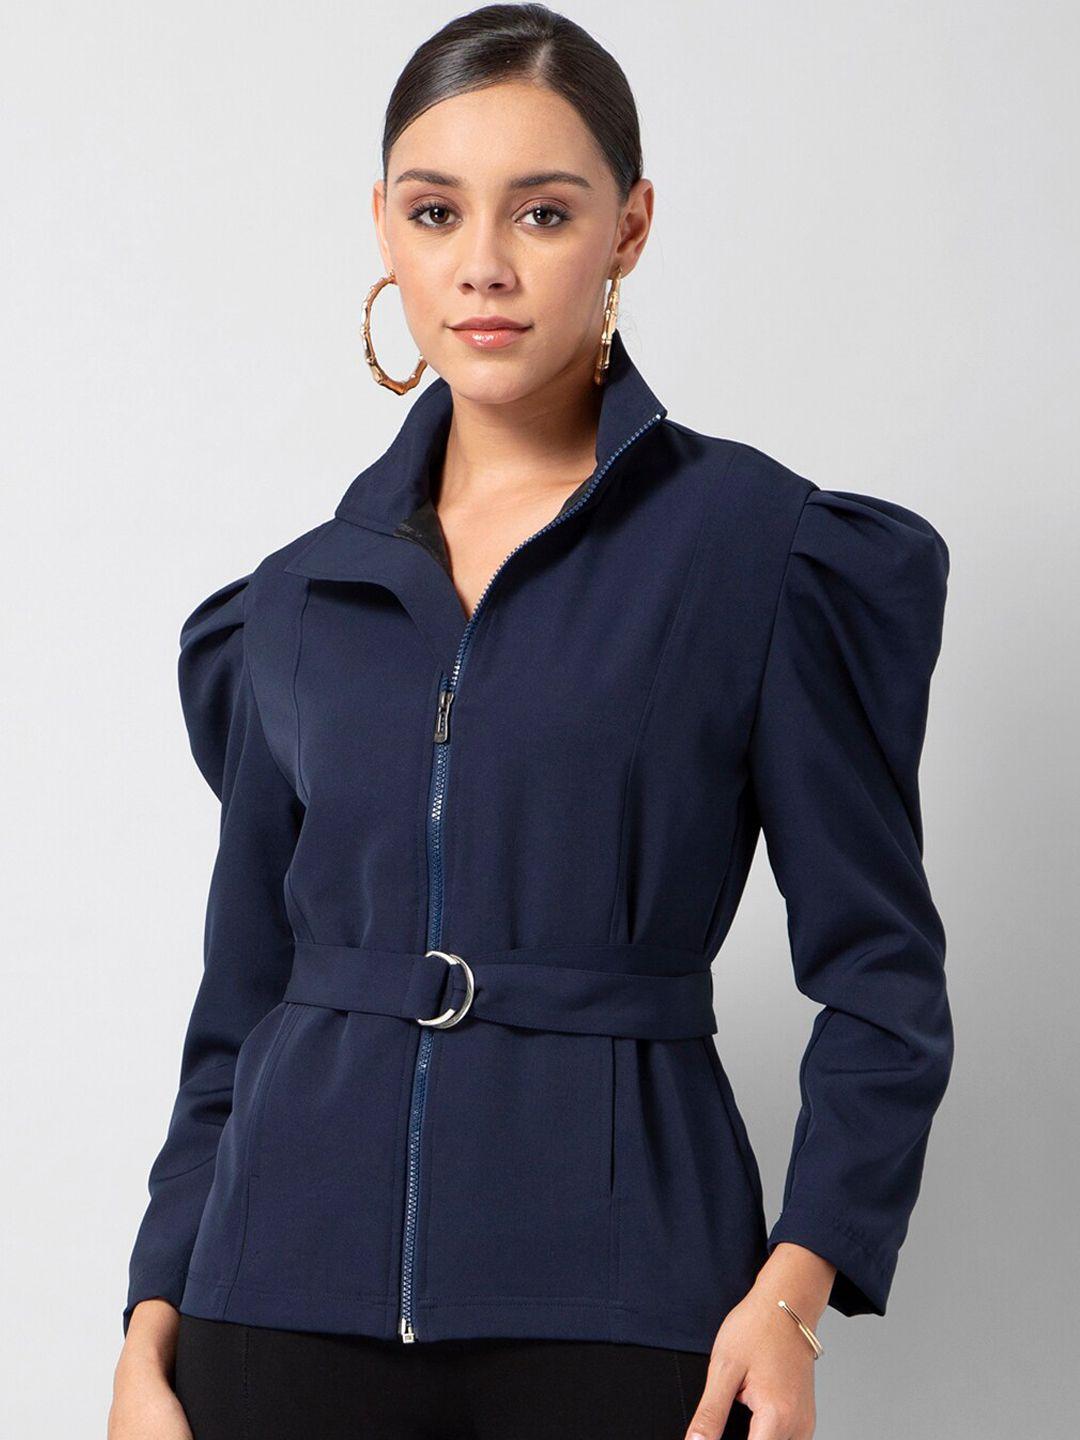 faballey women navy blue solid tailored jacket